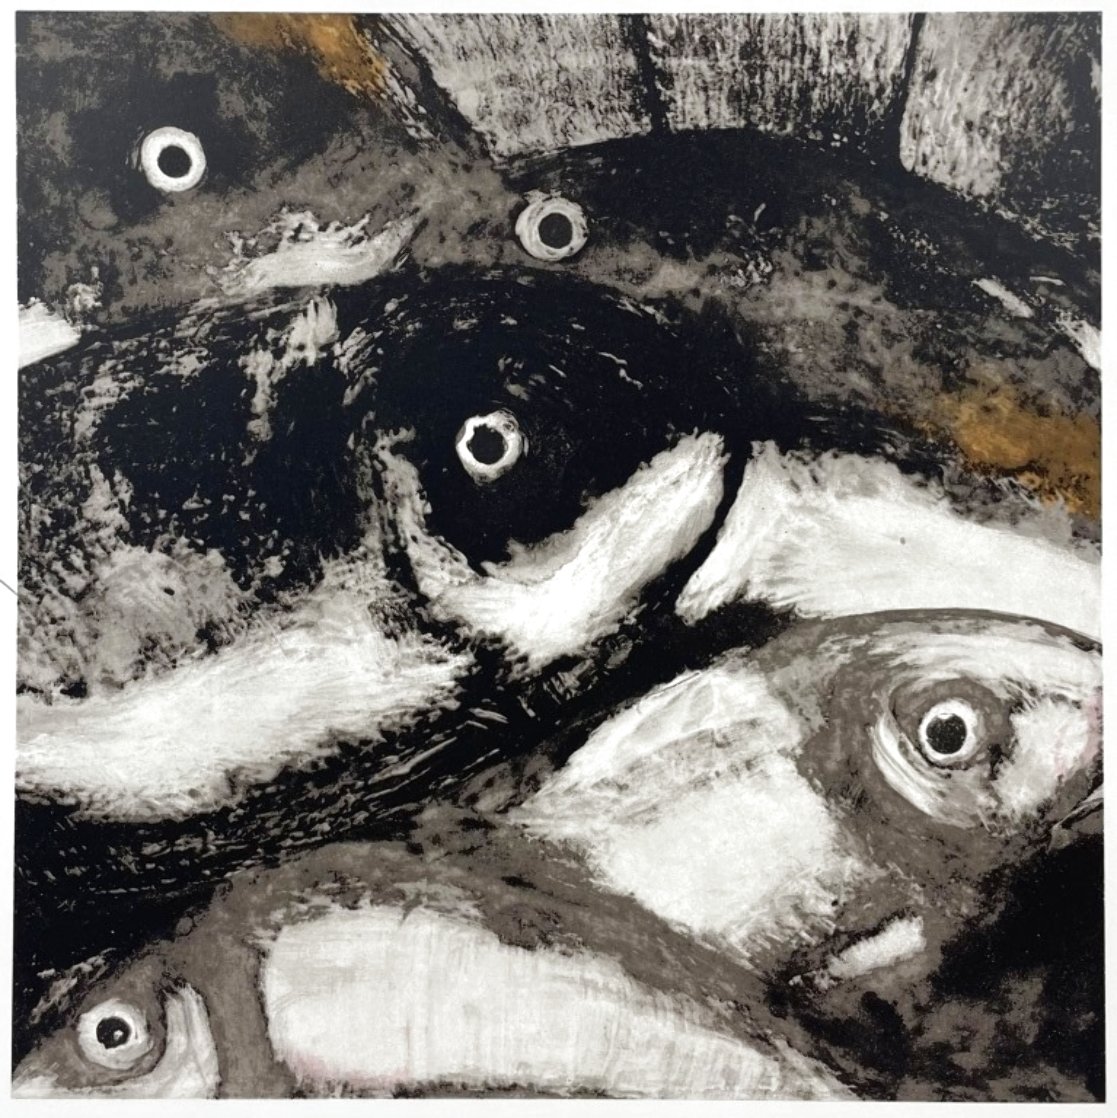 Fish (From Fruits and Flowers) 1990 Limited Edition Print by Donald Sultan